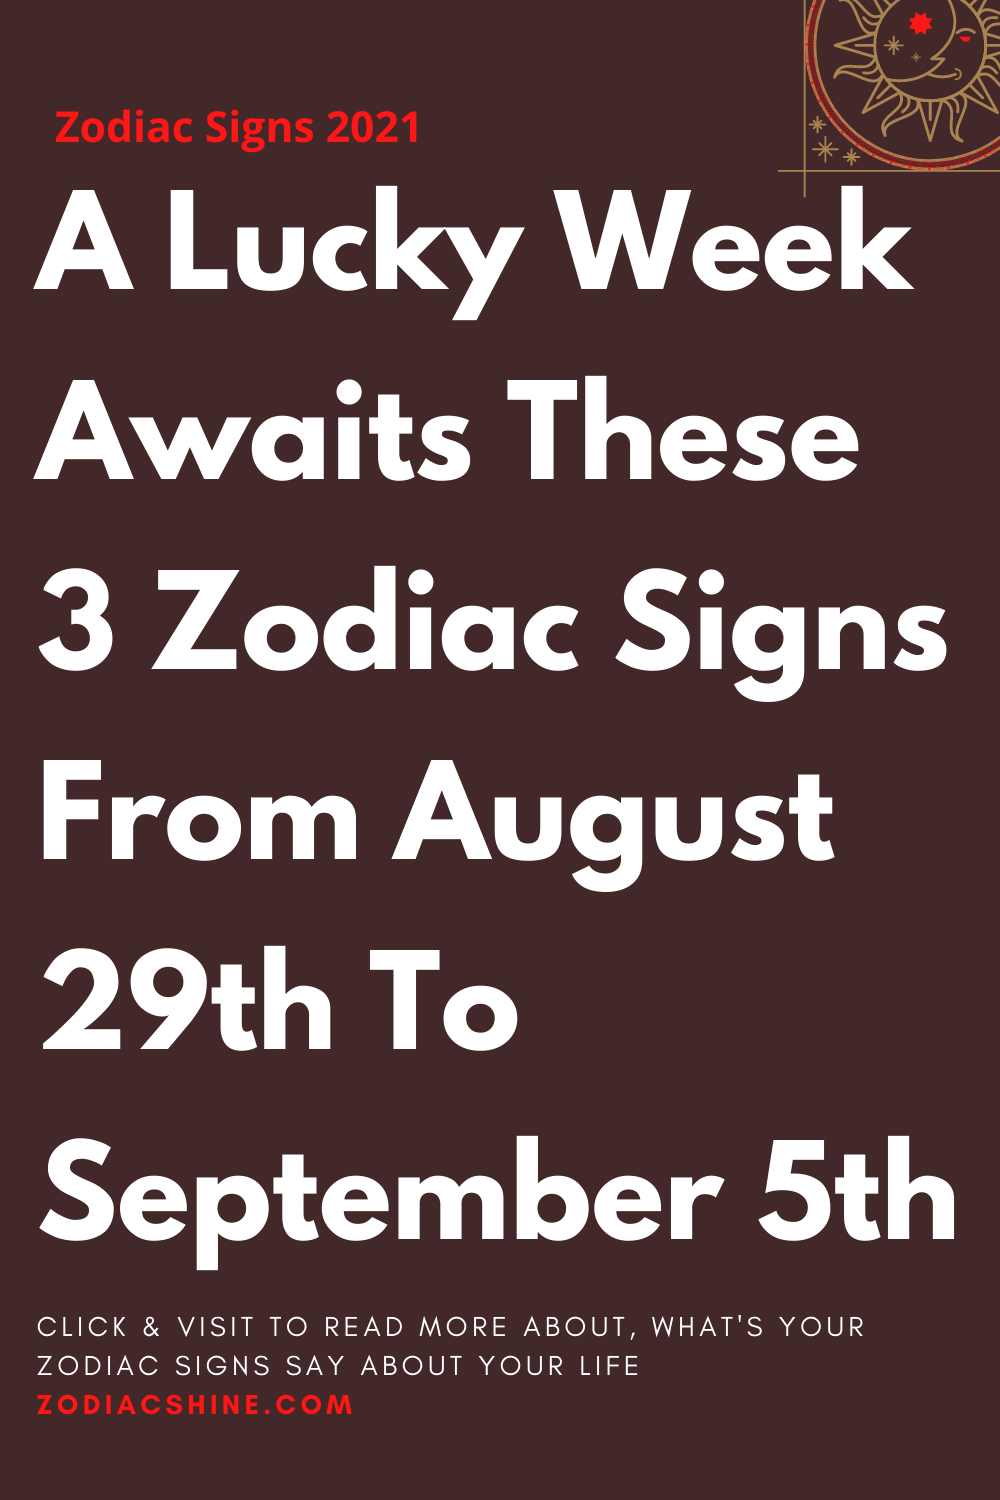 A Lucky Week Awaits These 3 Zodiac Signs From August 29th To September 5th